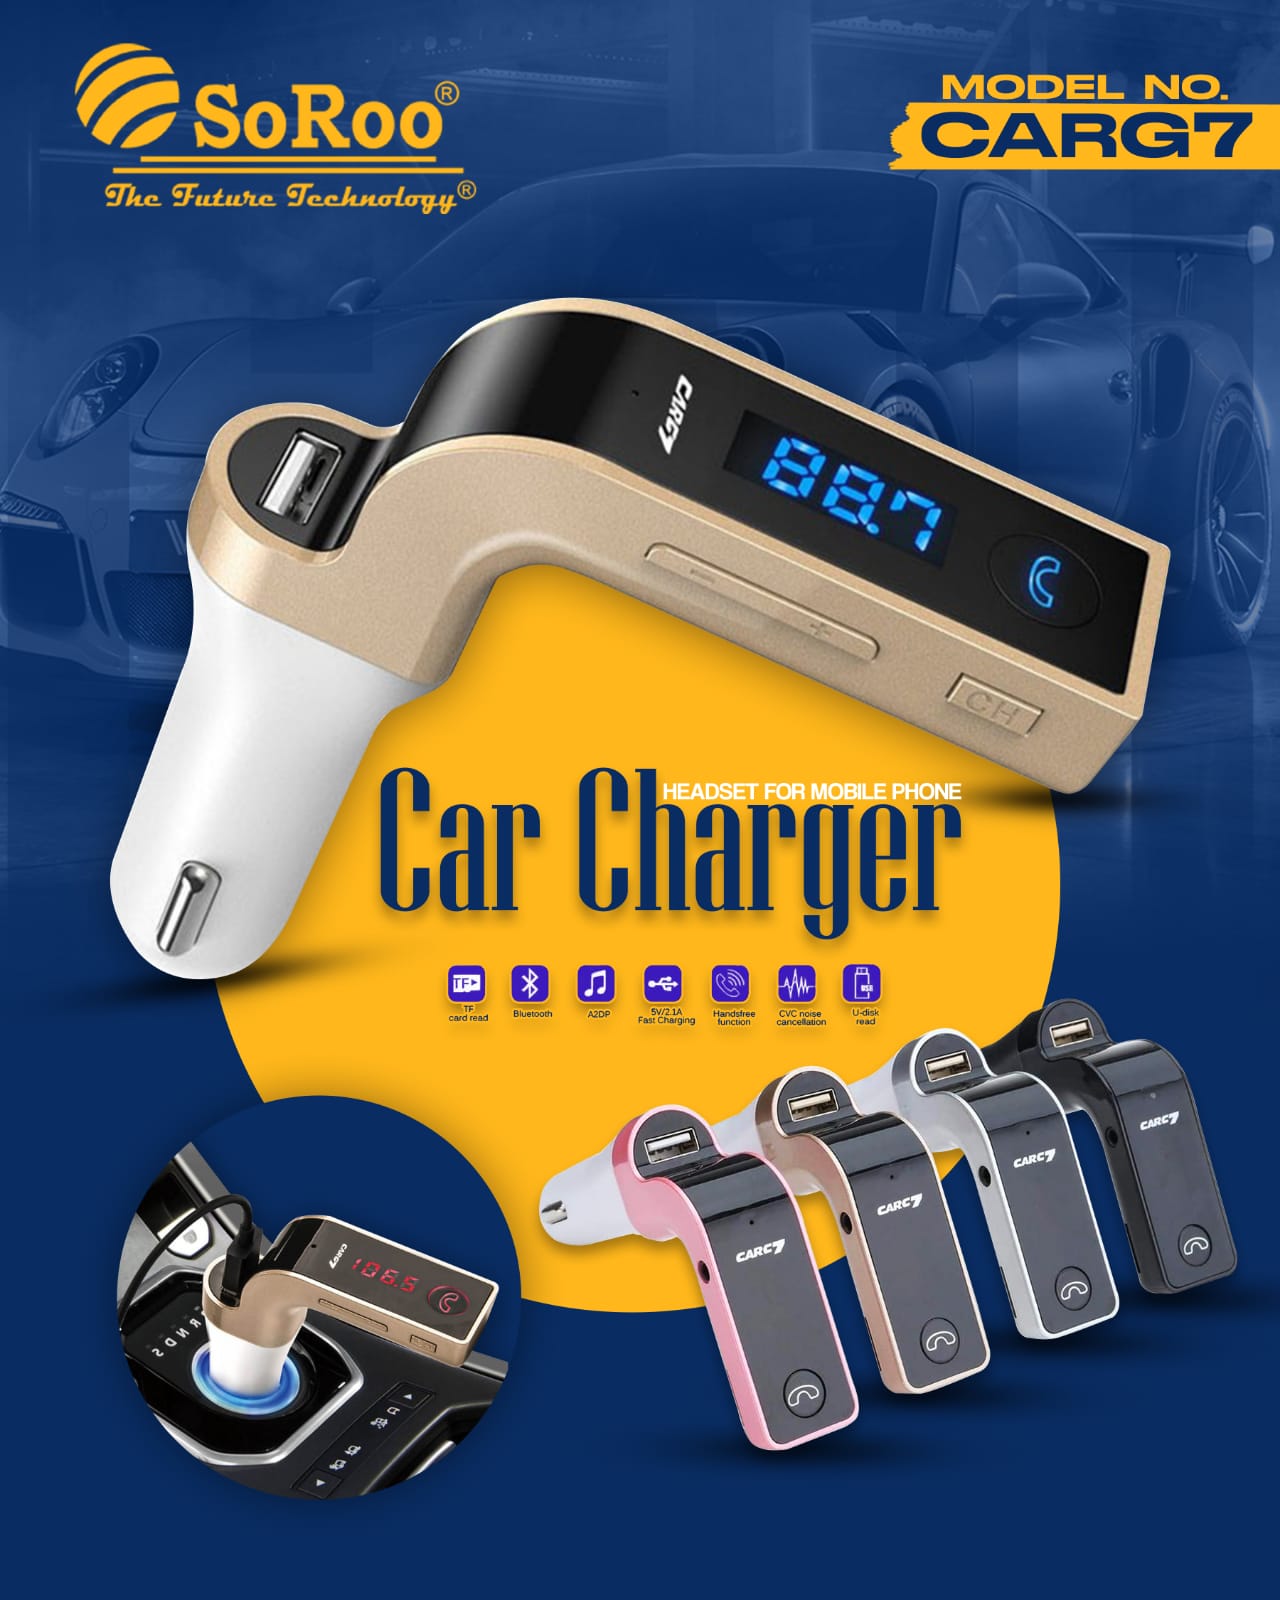 Soroo Mobile Headset Car Charger